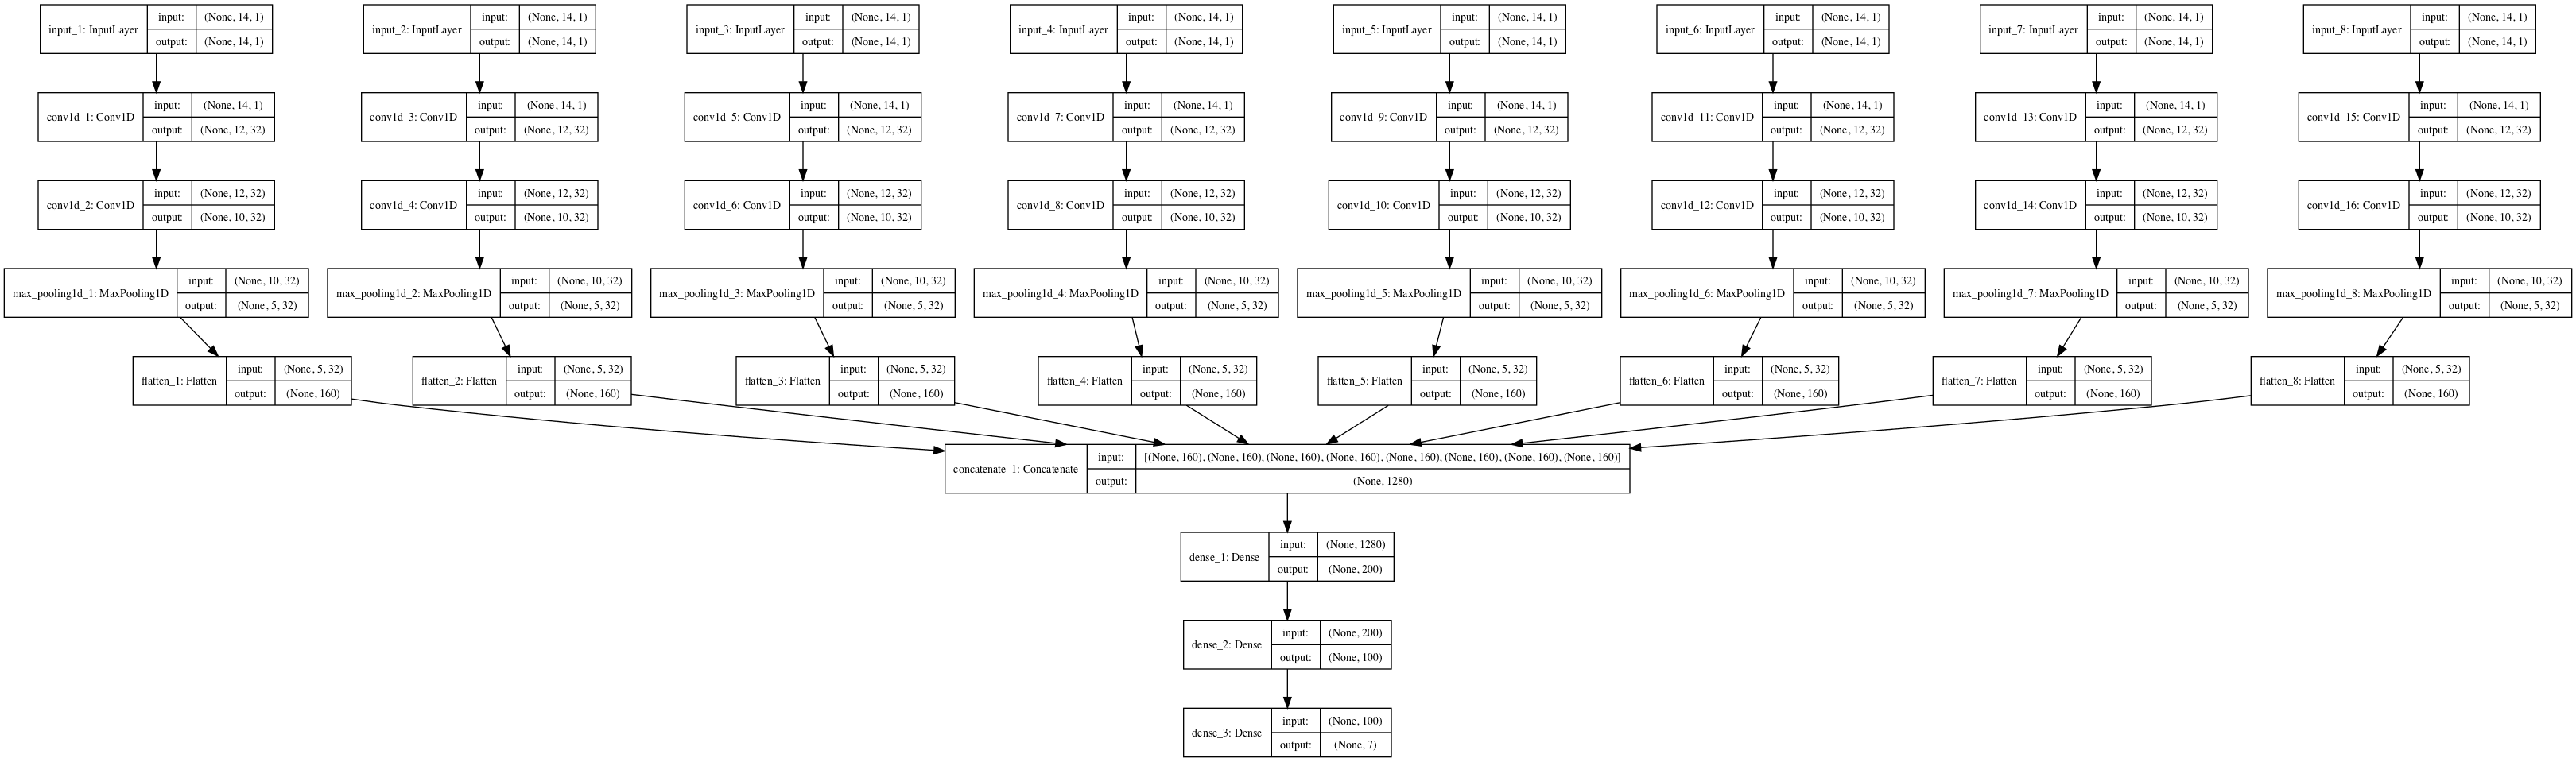 Structure of the Multi Headed Convolutional Neural Network